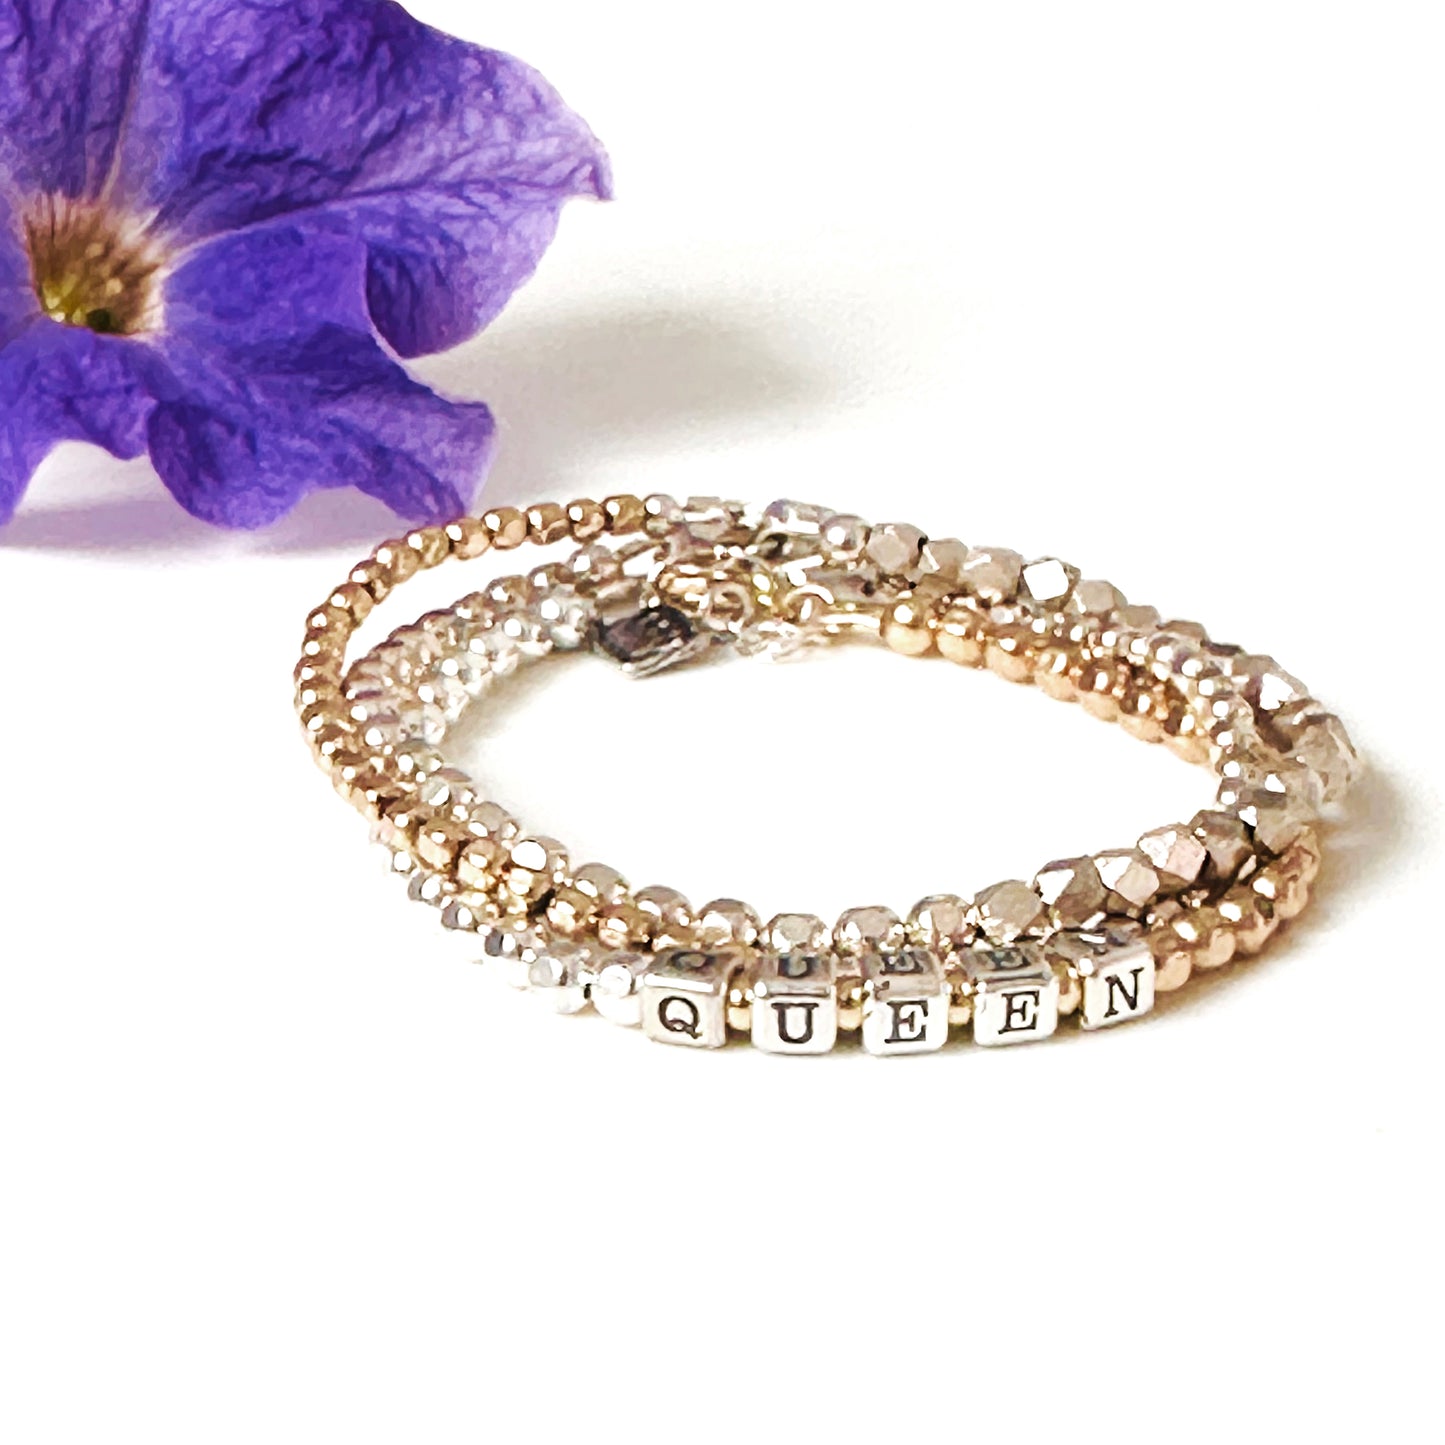 Queen Mixed Metals Sterling and 14k Gold Woman's stacking Bracelet shown with sterling silver and 14k gold beaded stacking bracelets